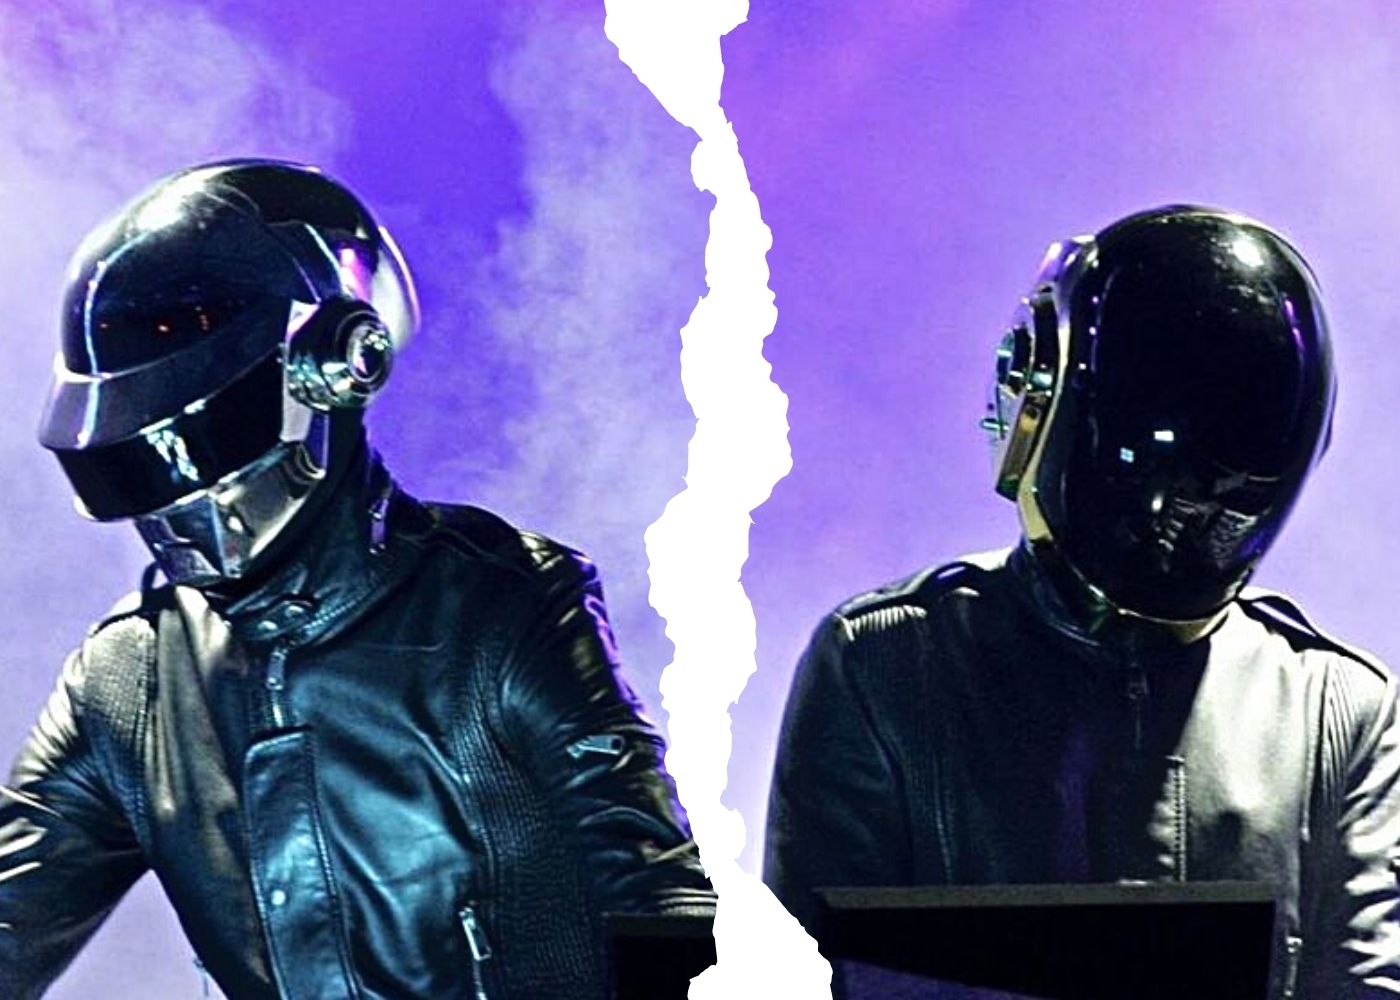 Daft Punk's retirement closes the book on an era of electronic music